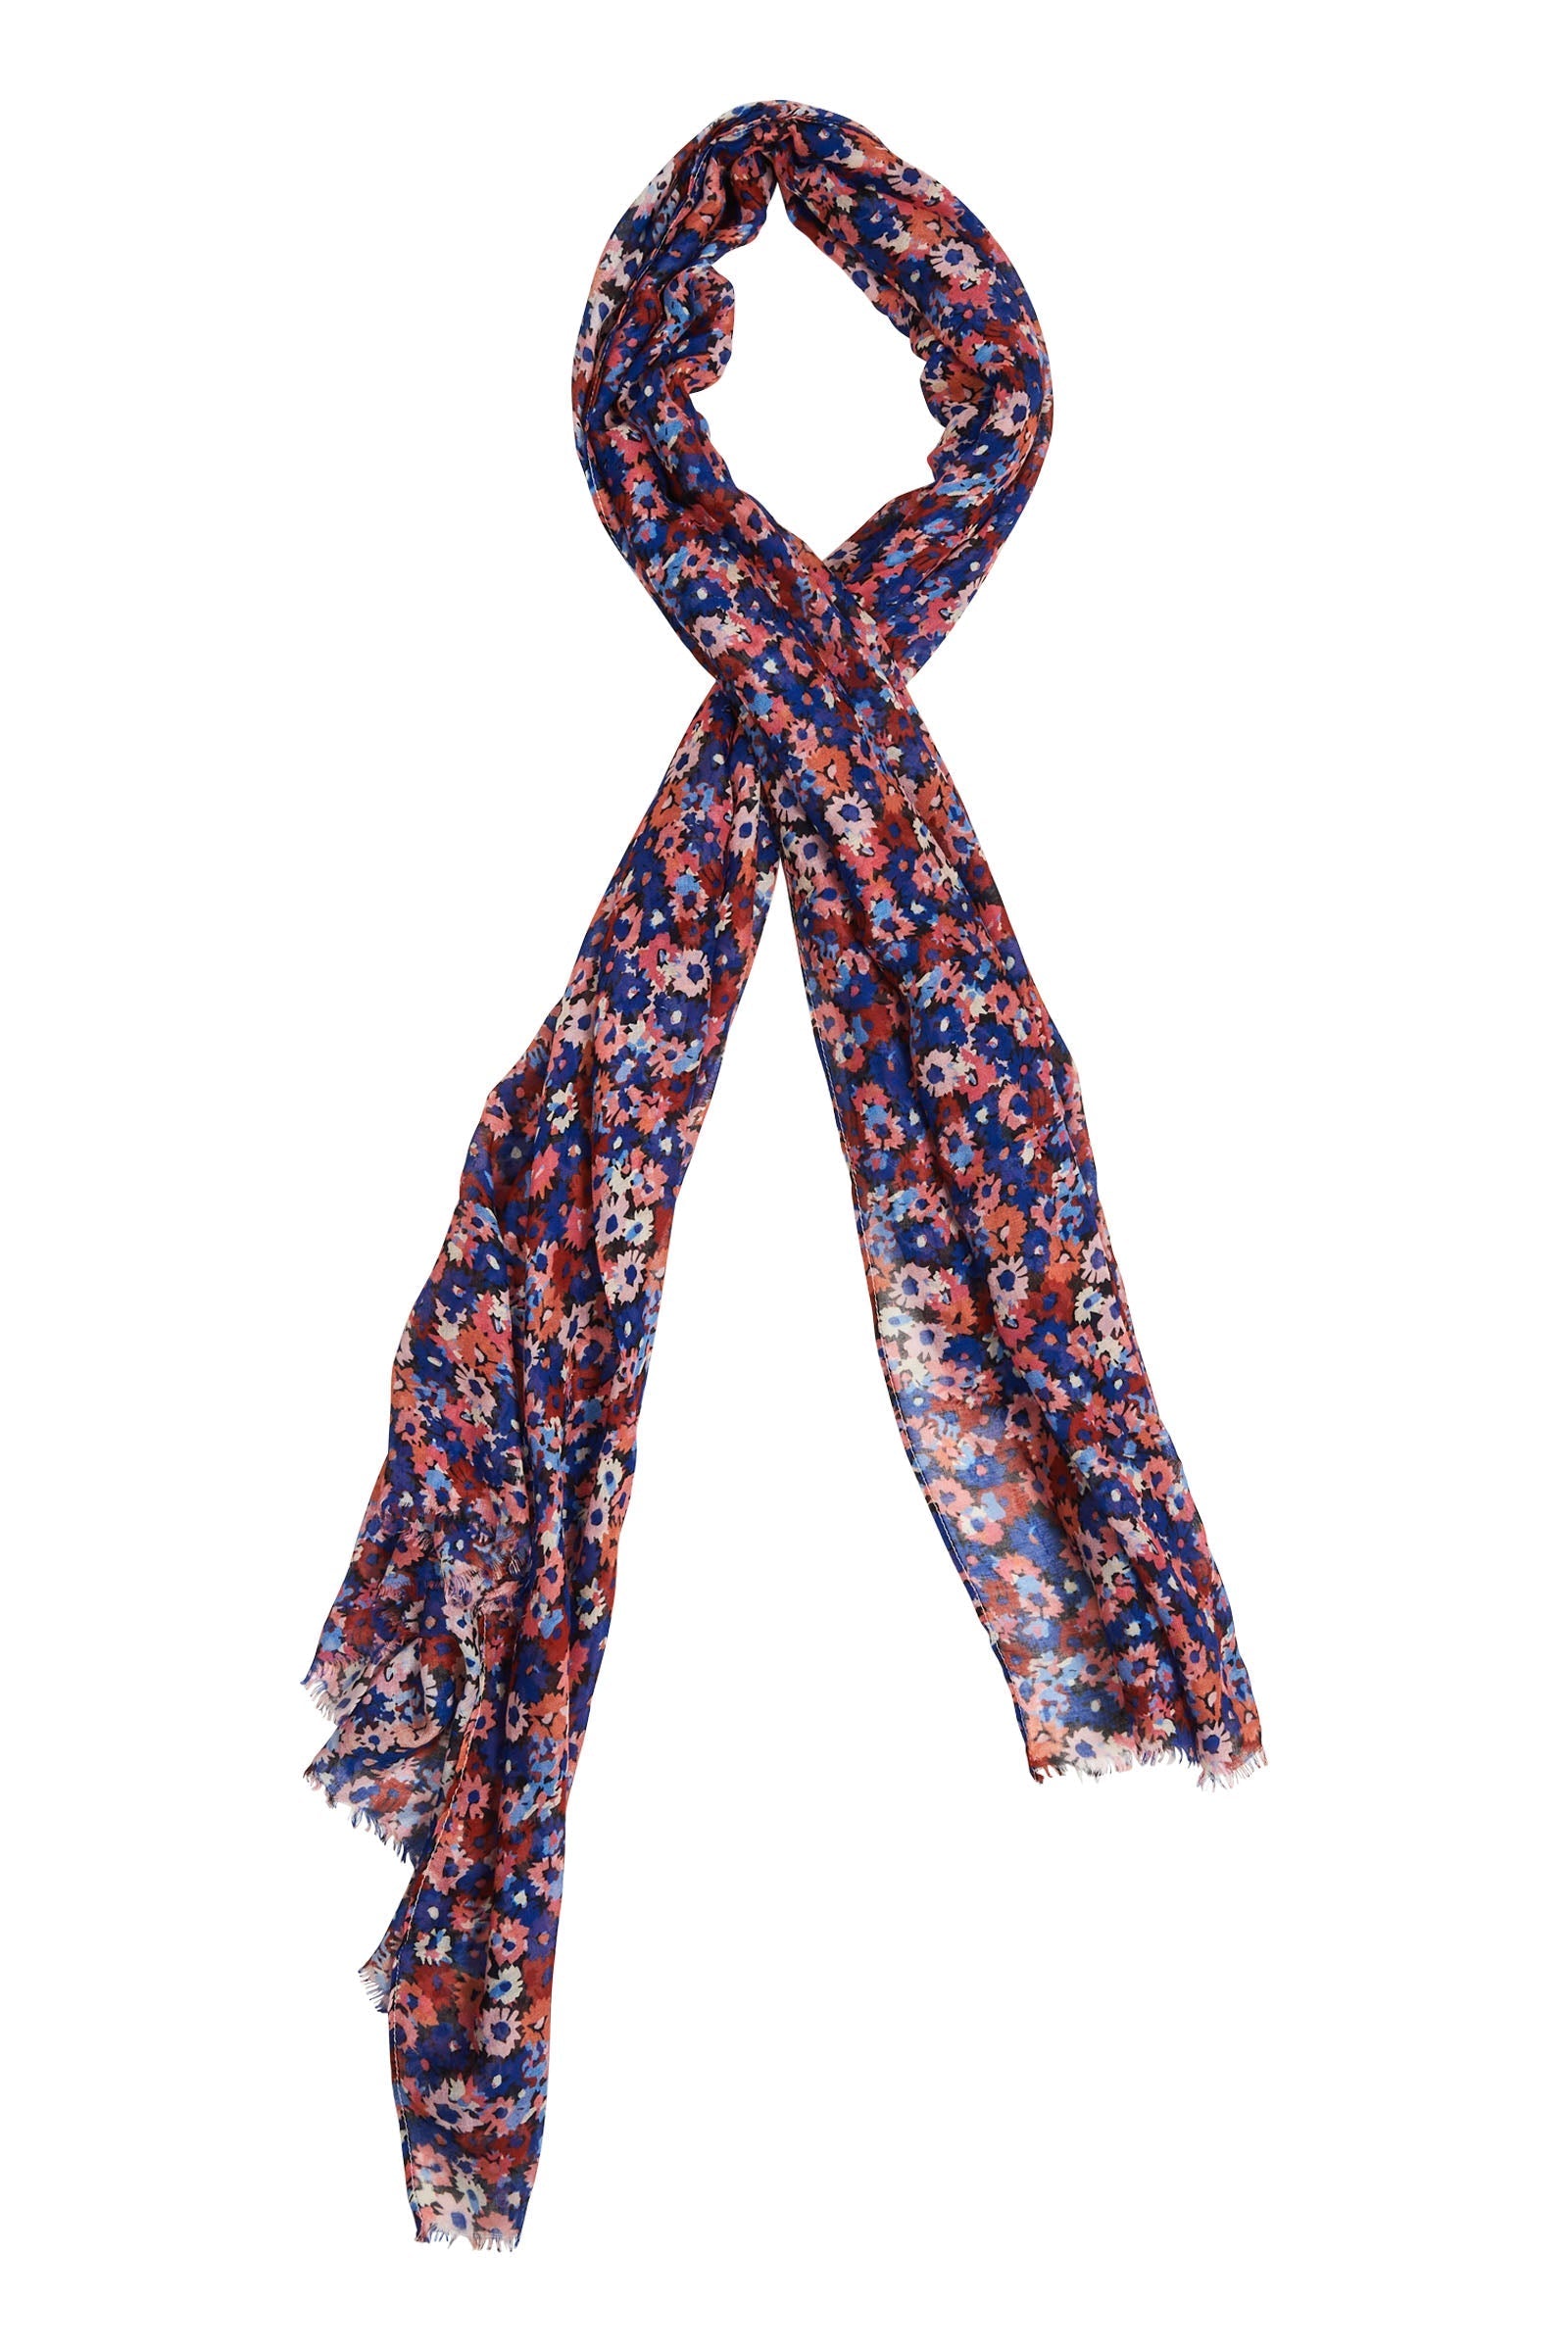 Euphoria Scarf - Azure Bloom-Scarves, Belts & Gloves-Isle Of Mine-The Bay Room